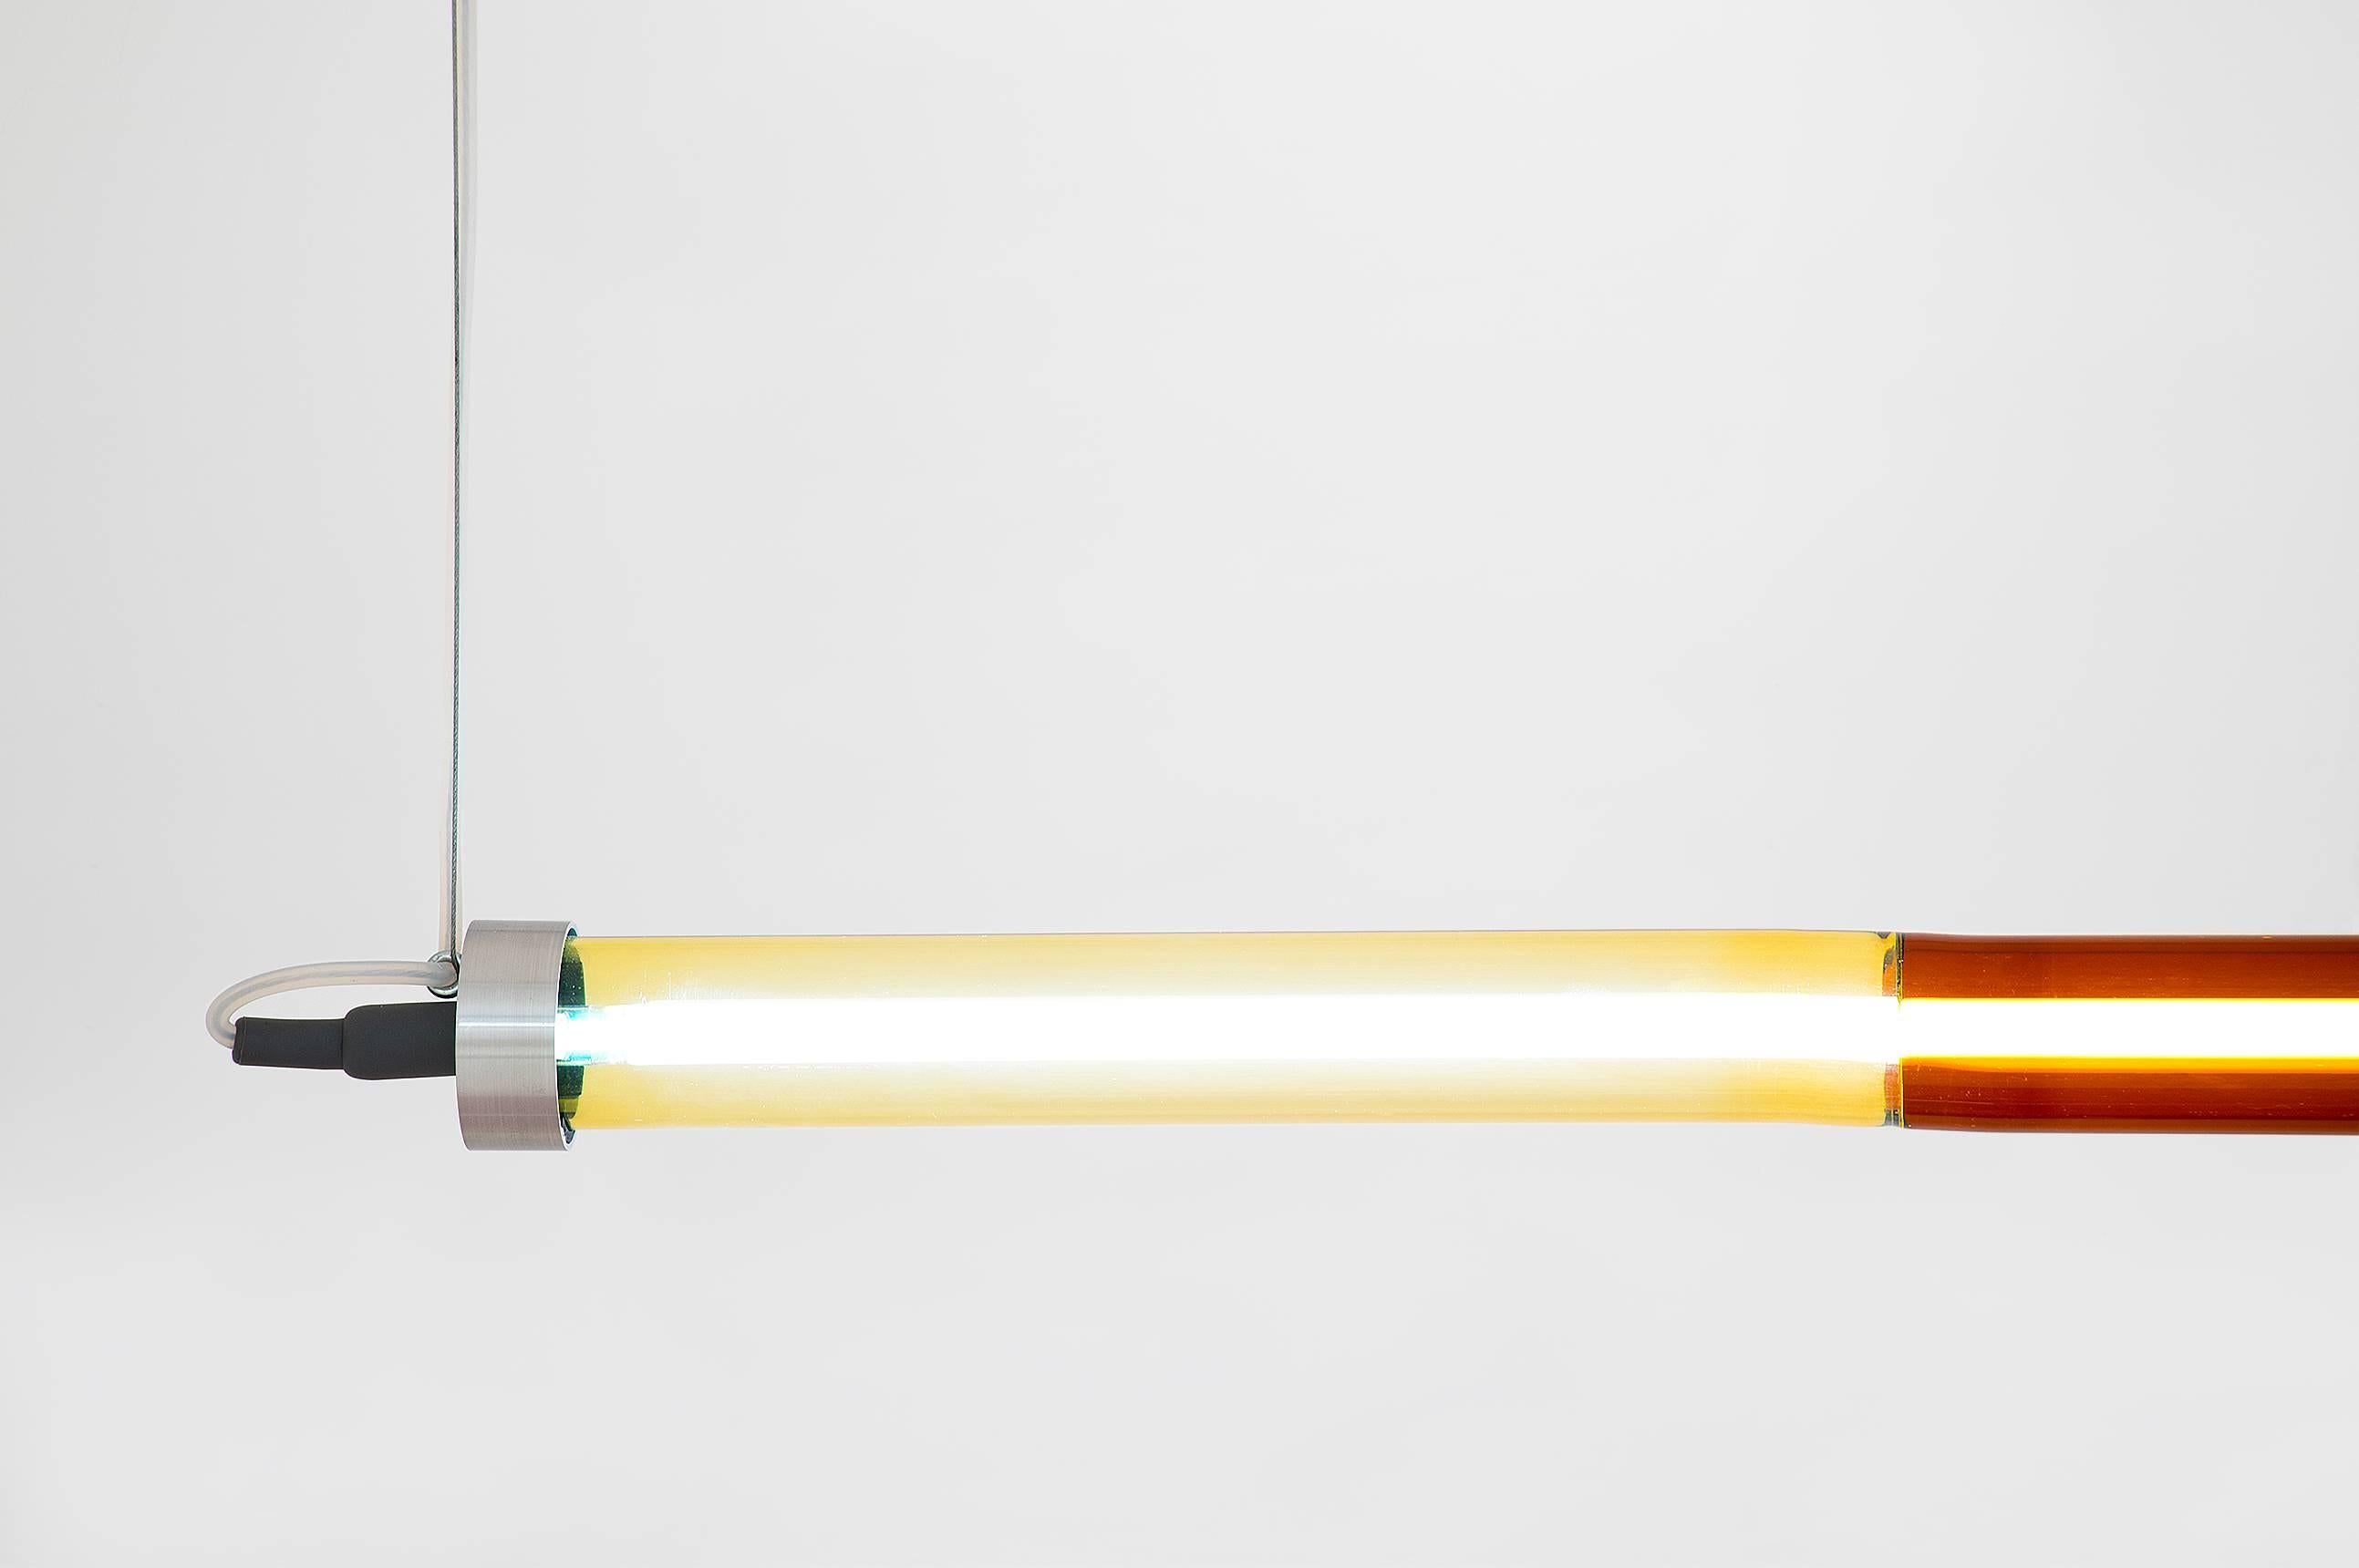 Sabine Marcelis

Ceiling lamp model “Horizontal Bicolor”
From the series “RAY”
Manufactured by Sabine Marcelis
Produced in exclusive for Side Gallery
Rotterdam, The Netherlands 2017
Colored glass tube in amber and yellow, white